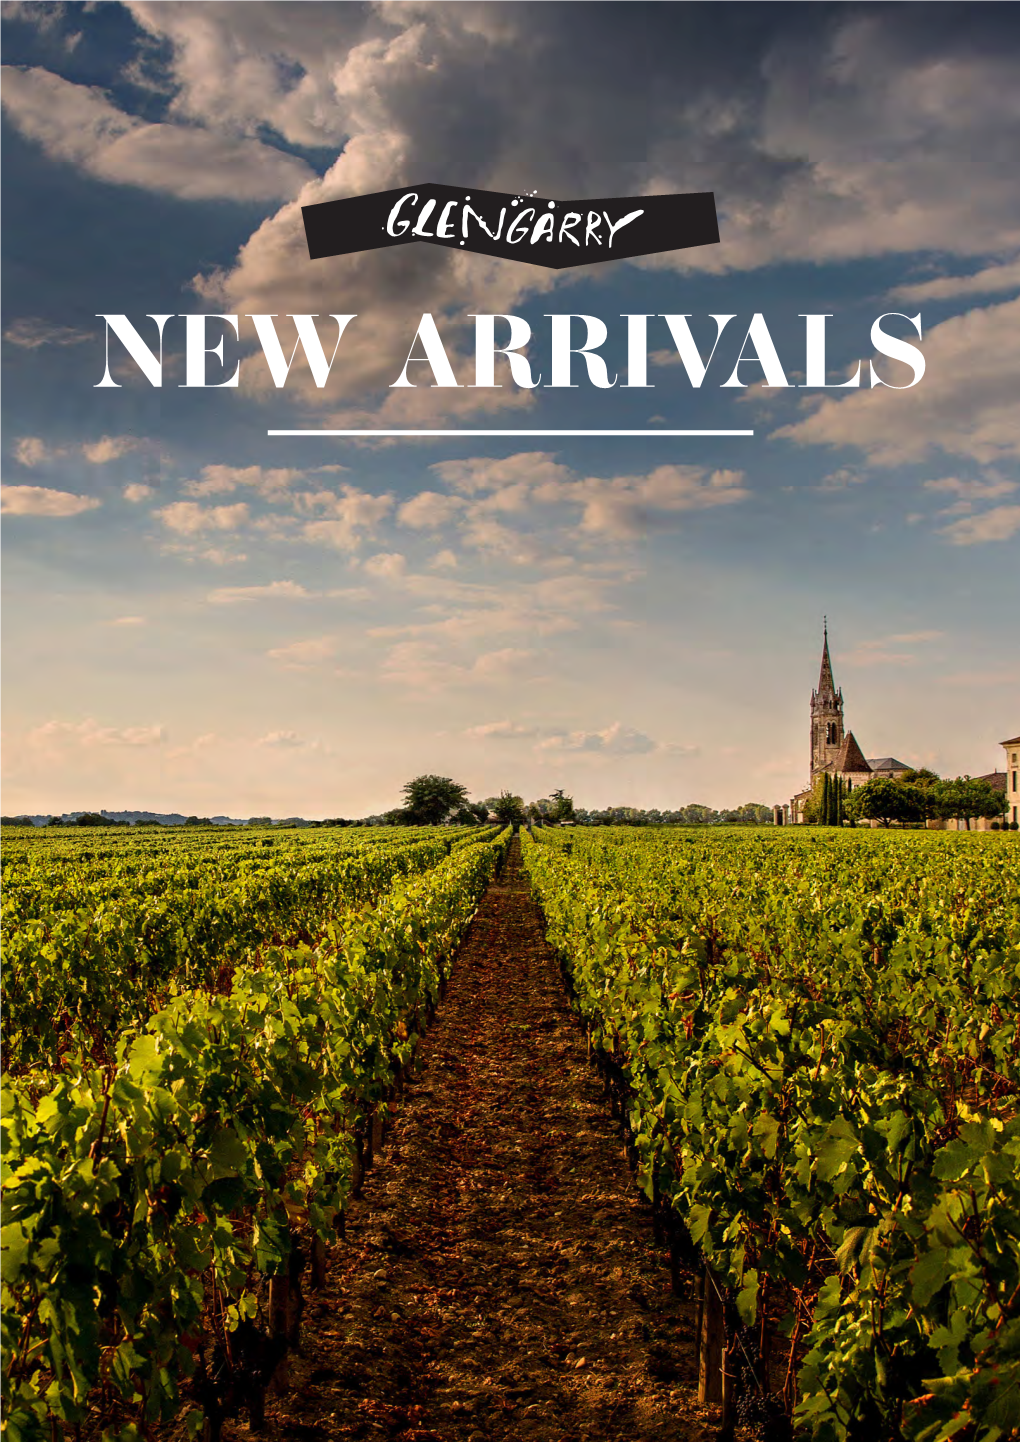 NEW ARRIVALS NEW ARRIVALS MAY 2020 Throughout the Last Few Weeks, We Have Landed Several Containers of Our Glengarry Direct Imports